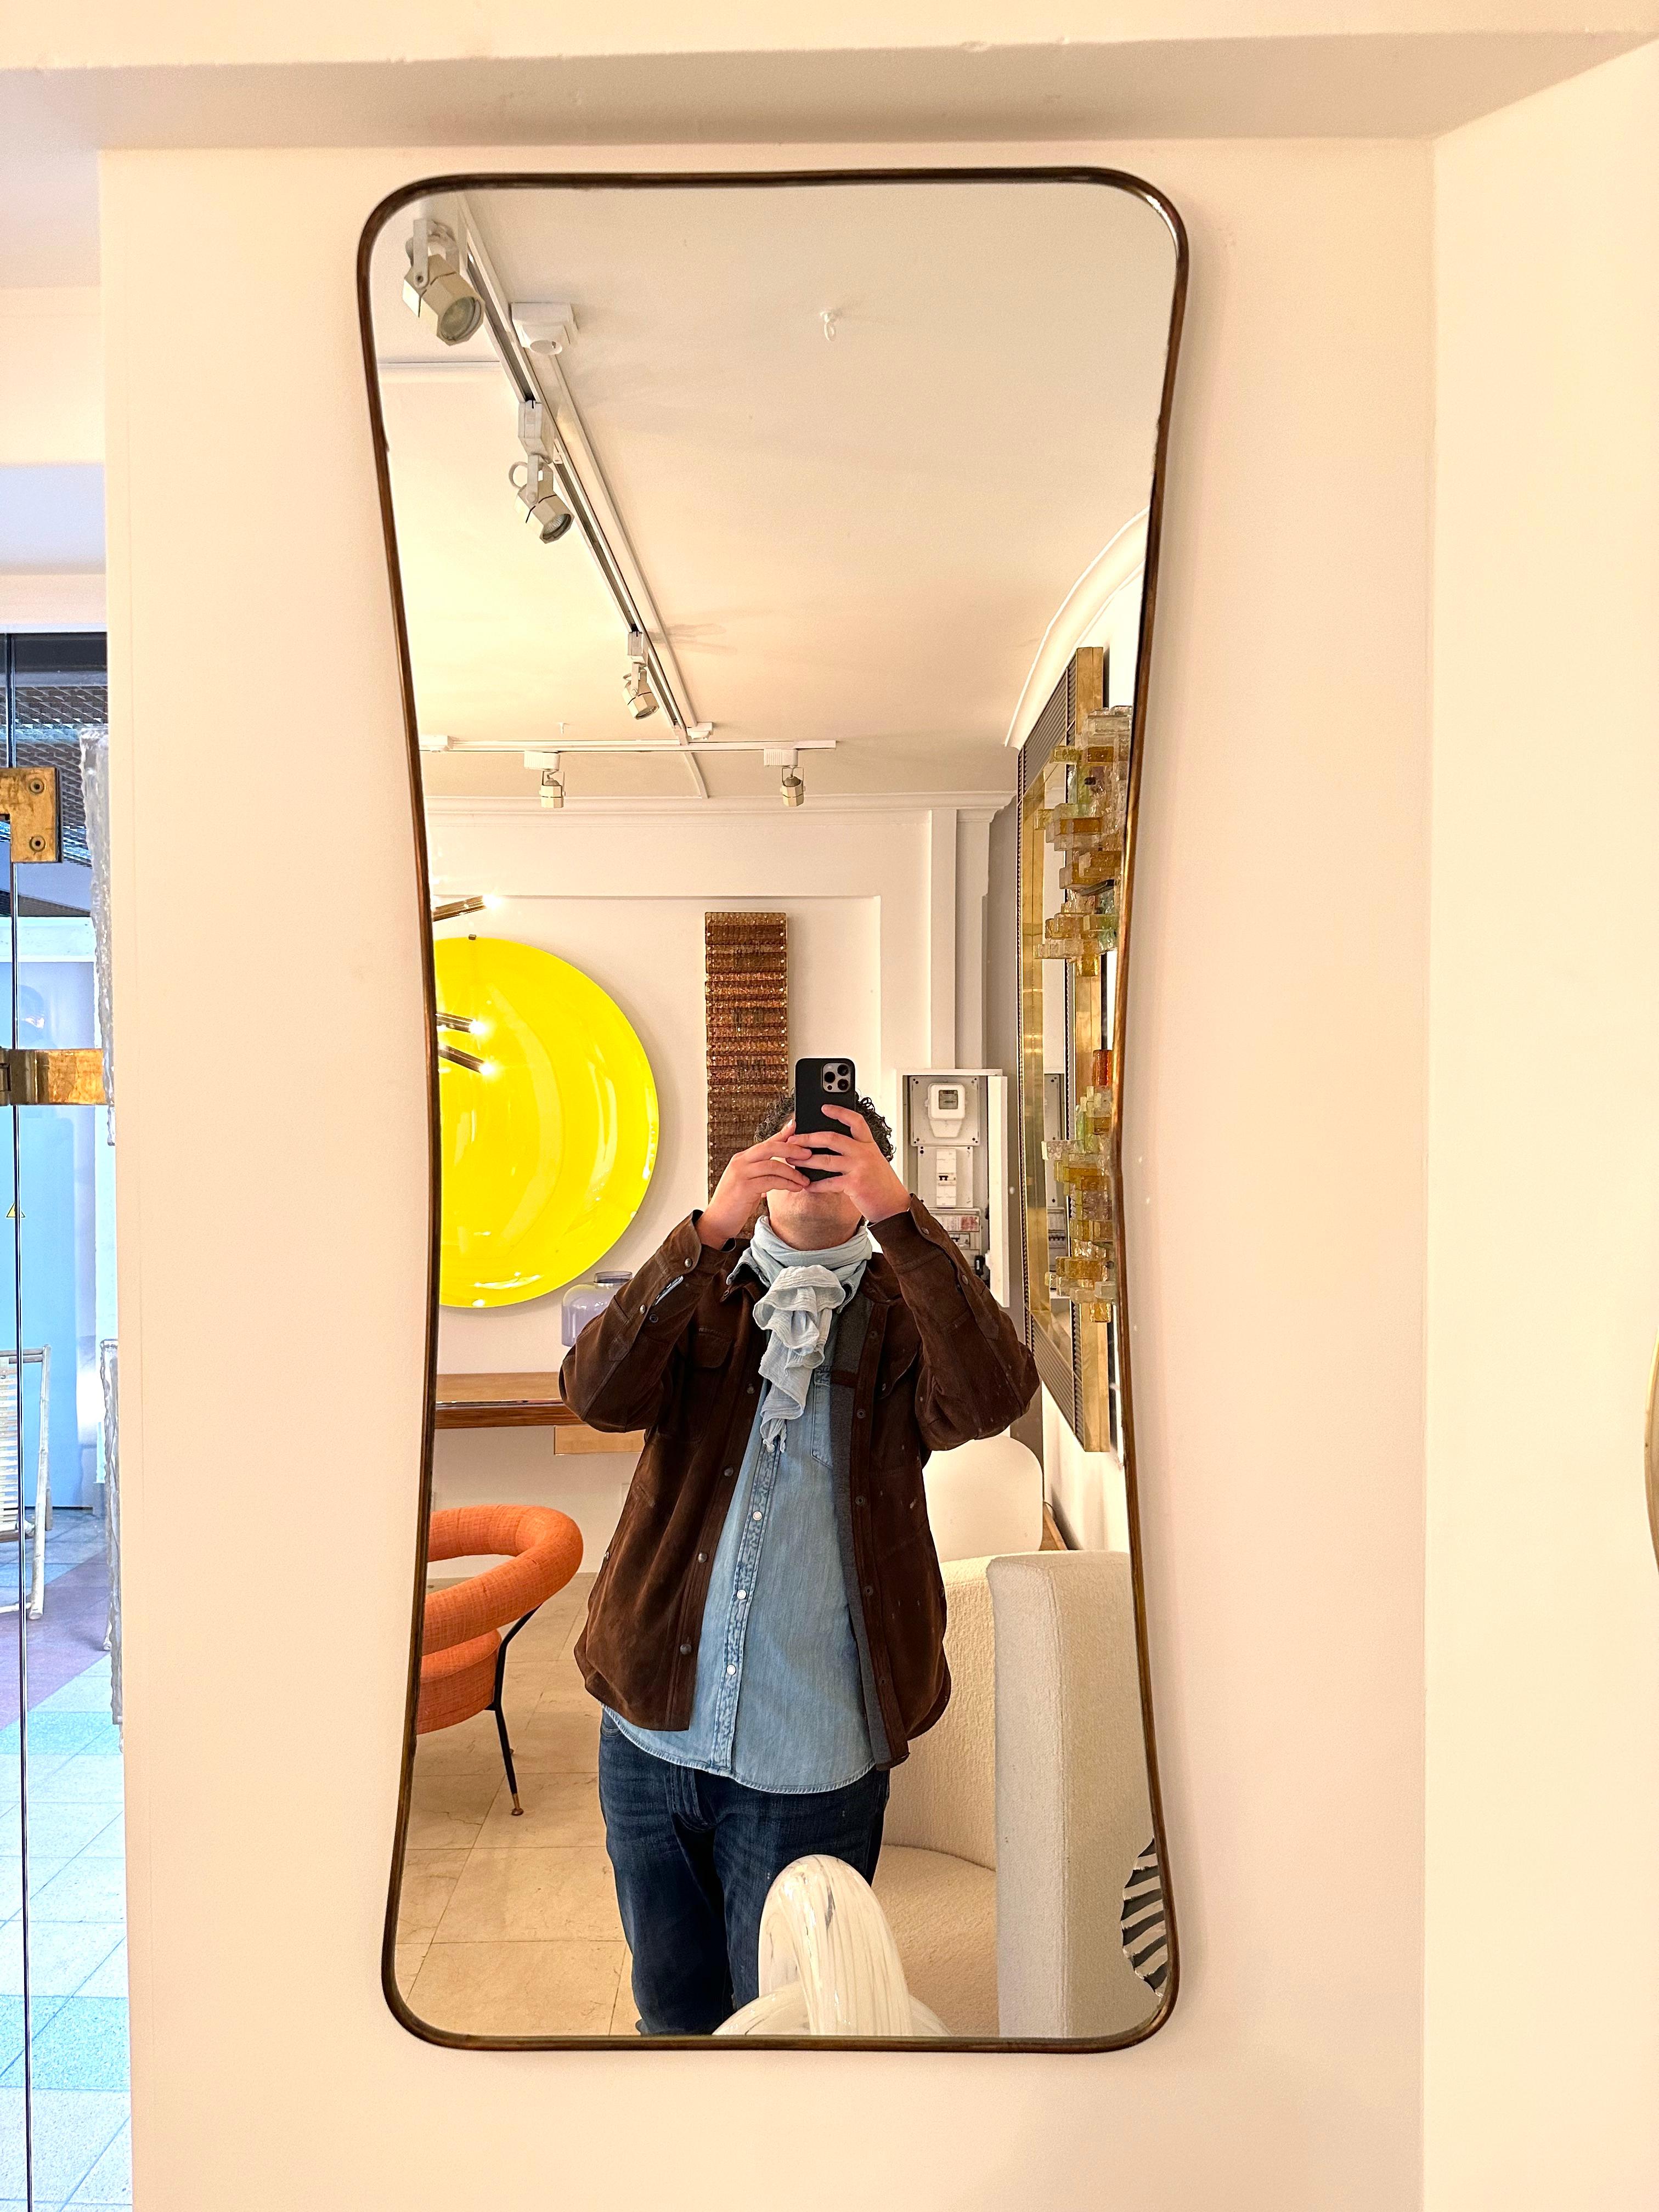 Mid-Century Modern rectangle freeform brass frame mirror. Nice patina. Gio Ponti placed this style of mirror in his interiors during the 1950s and 1960s.

Price listed by mirror. In sale separately.
For the pair please indicate quantity X2 at